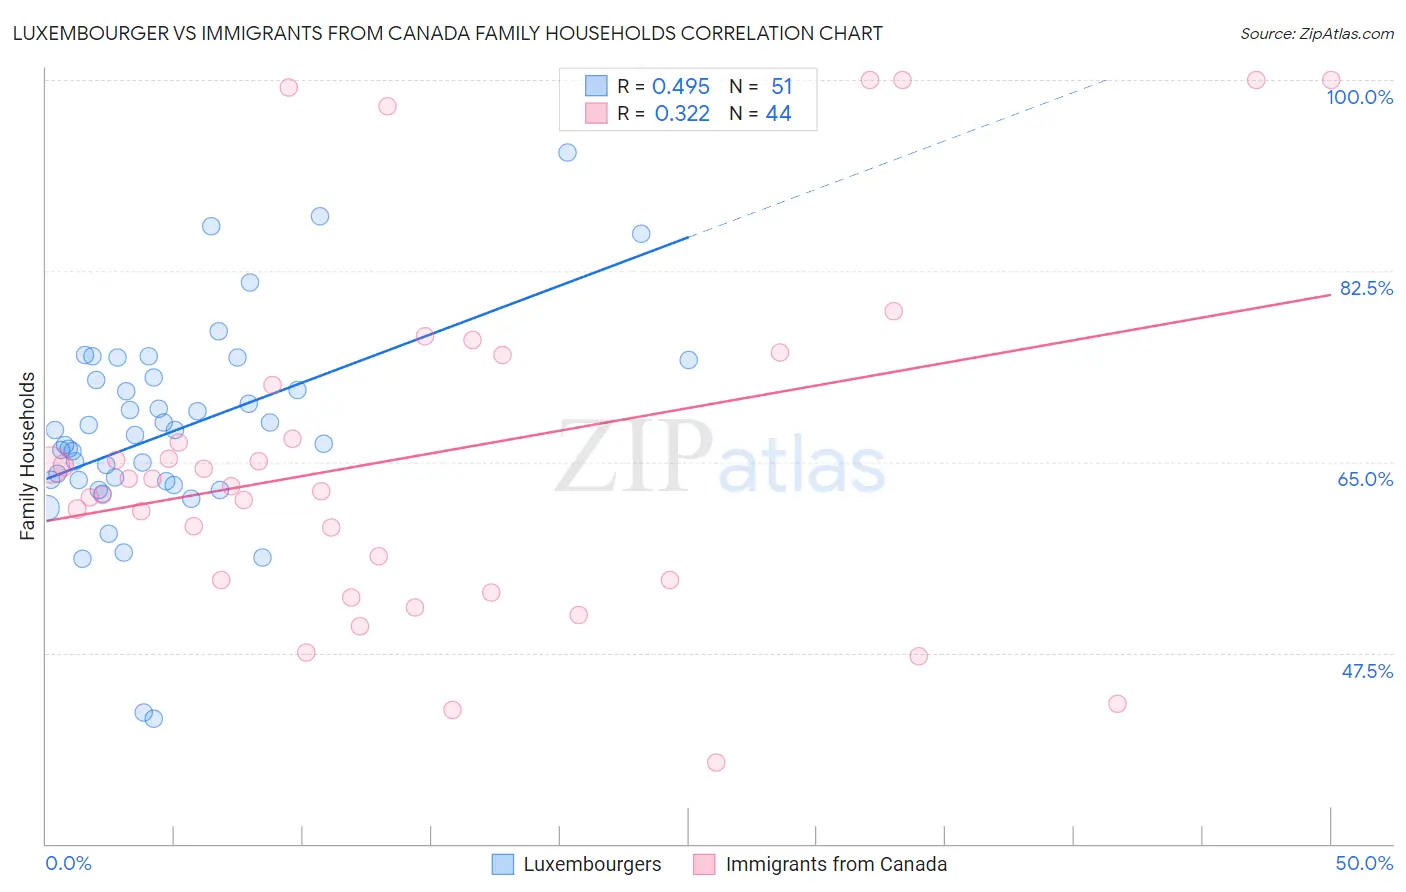 Luxembourger vs Immigrants from Canada Family Households